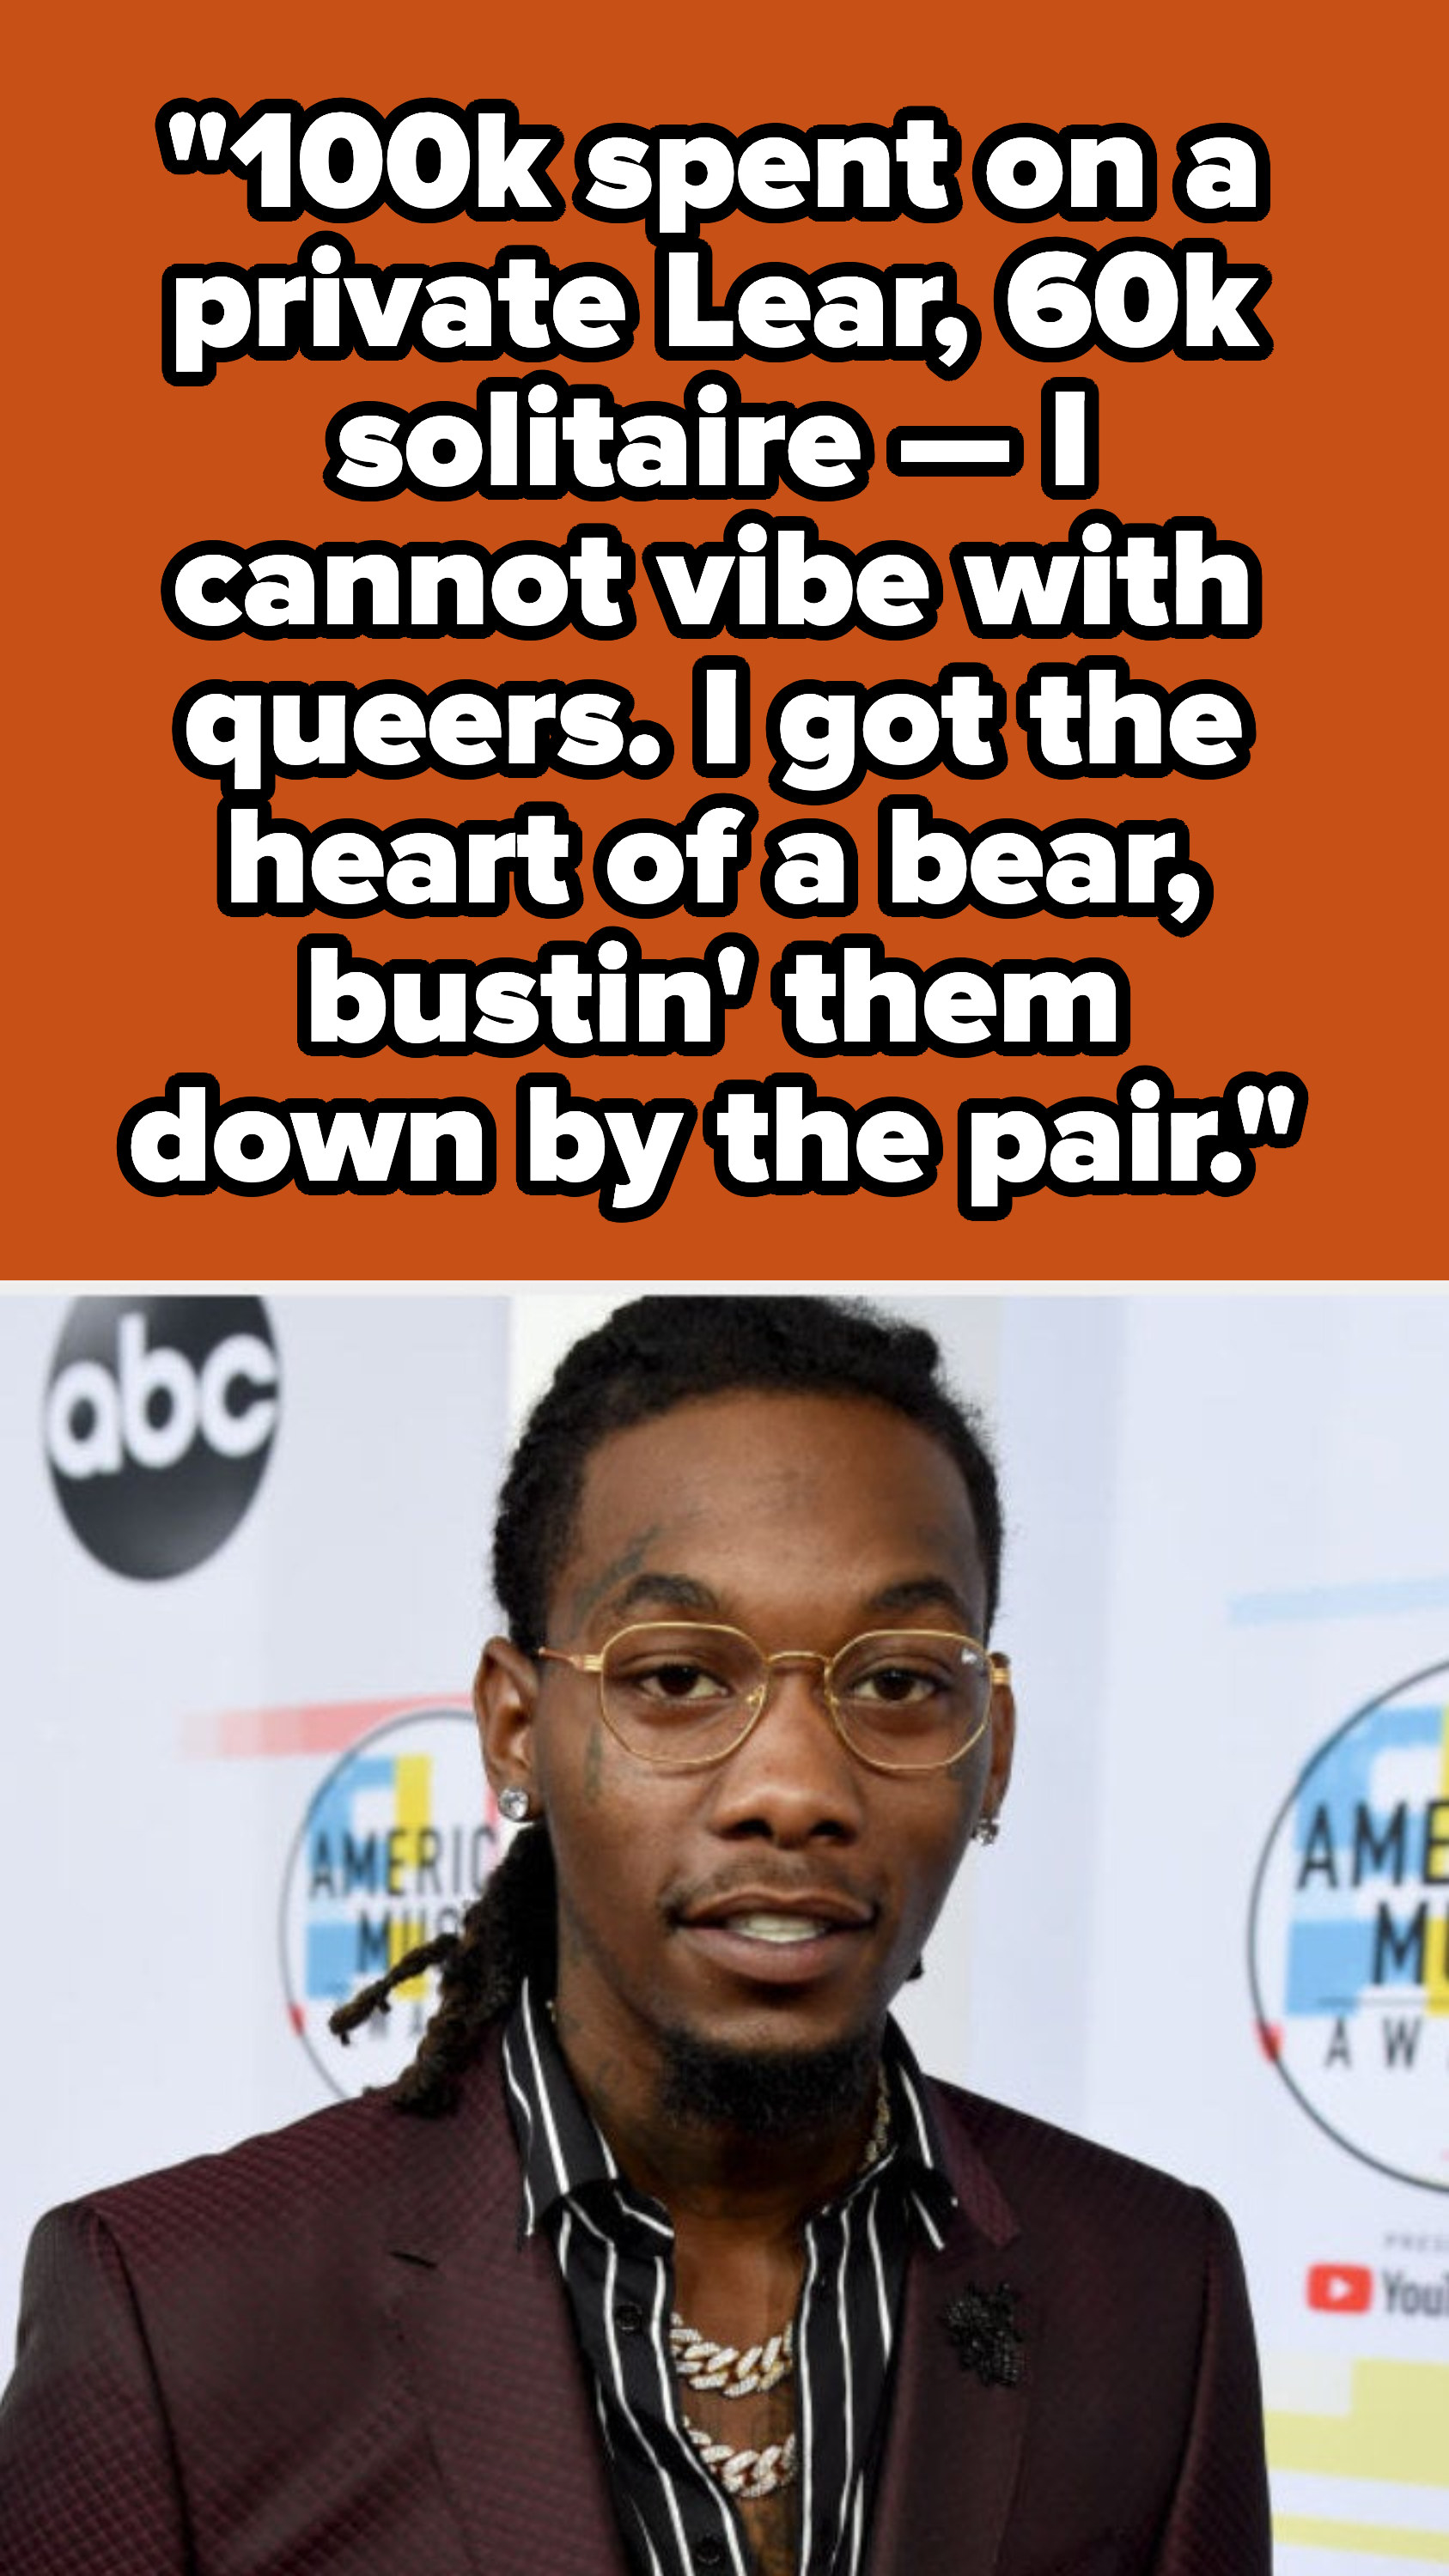 Offset verse: &quot;100k spent on a private Lear, 60k solitaire, I cannot vibe with queers. I got the heart of a bear, bustin&#x27; them down by the pair&quot;